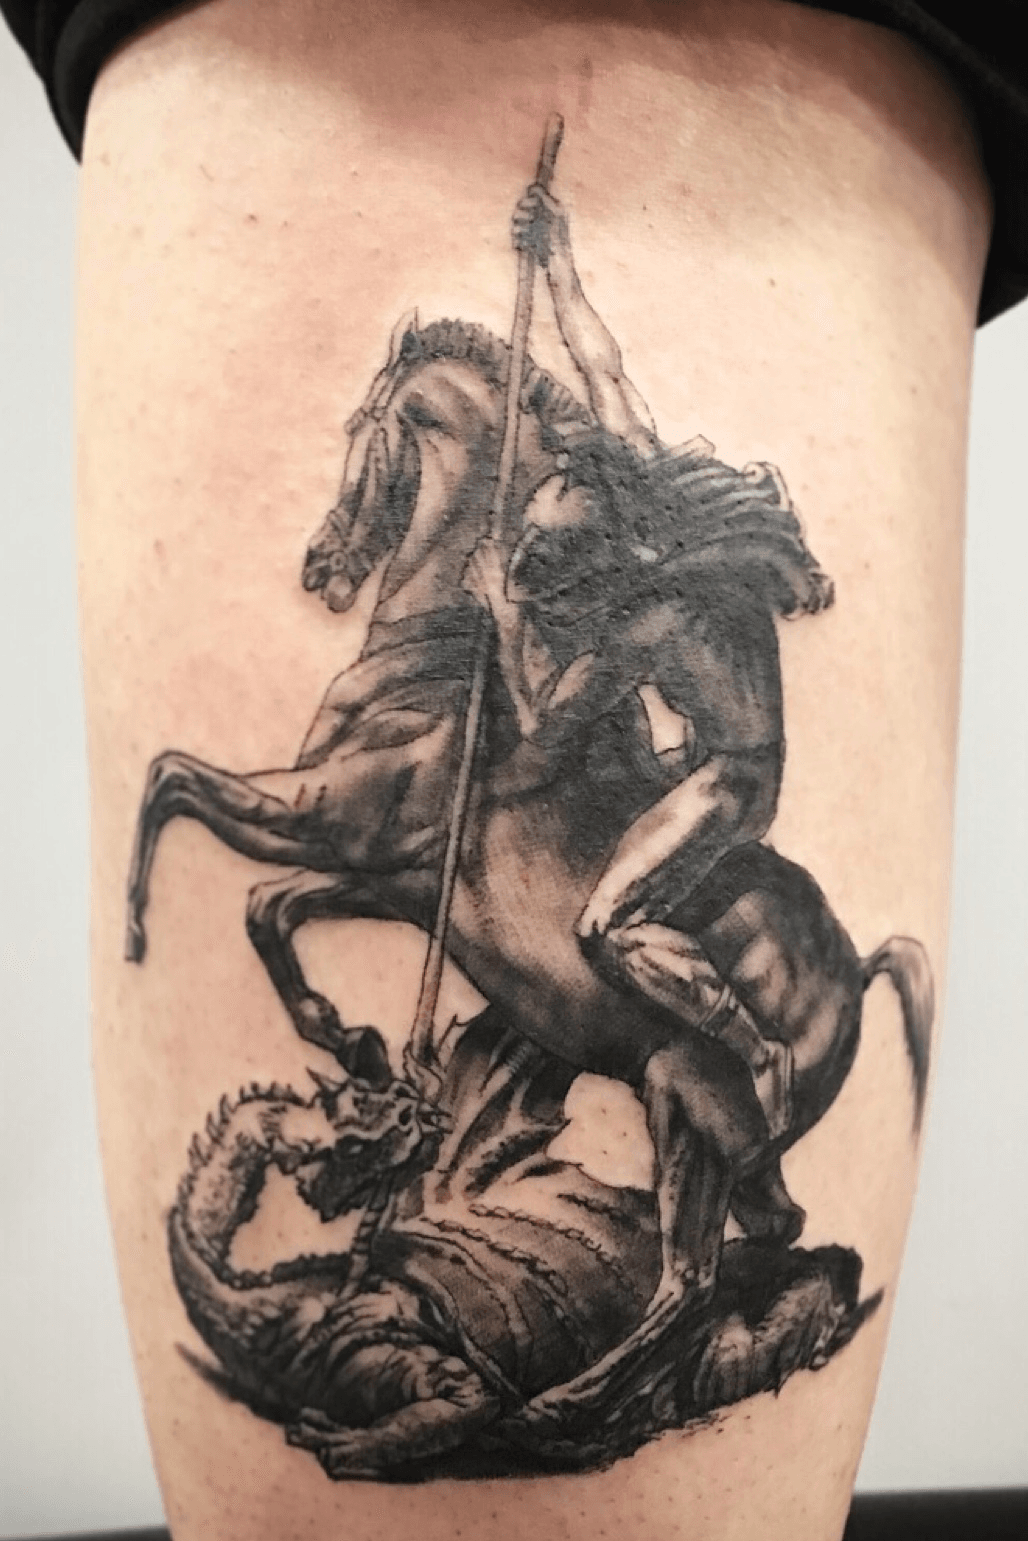 Tattoo uploaded by Lorne  Saint George slaying dragons Thanks Marc   All likes saves comments and shares are appreciated    lornetattoosca for booking  tuesdaytoptags floraltattoo torontoink  torontotattoo torontotattooartist 